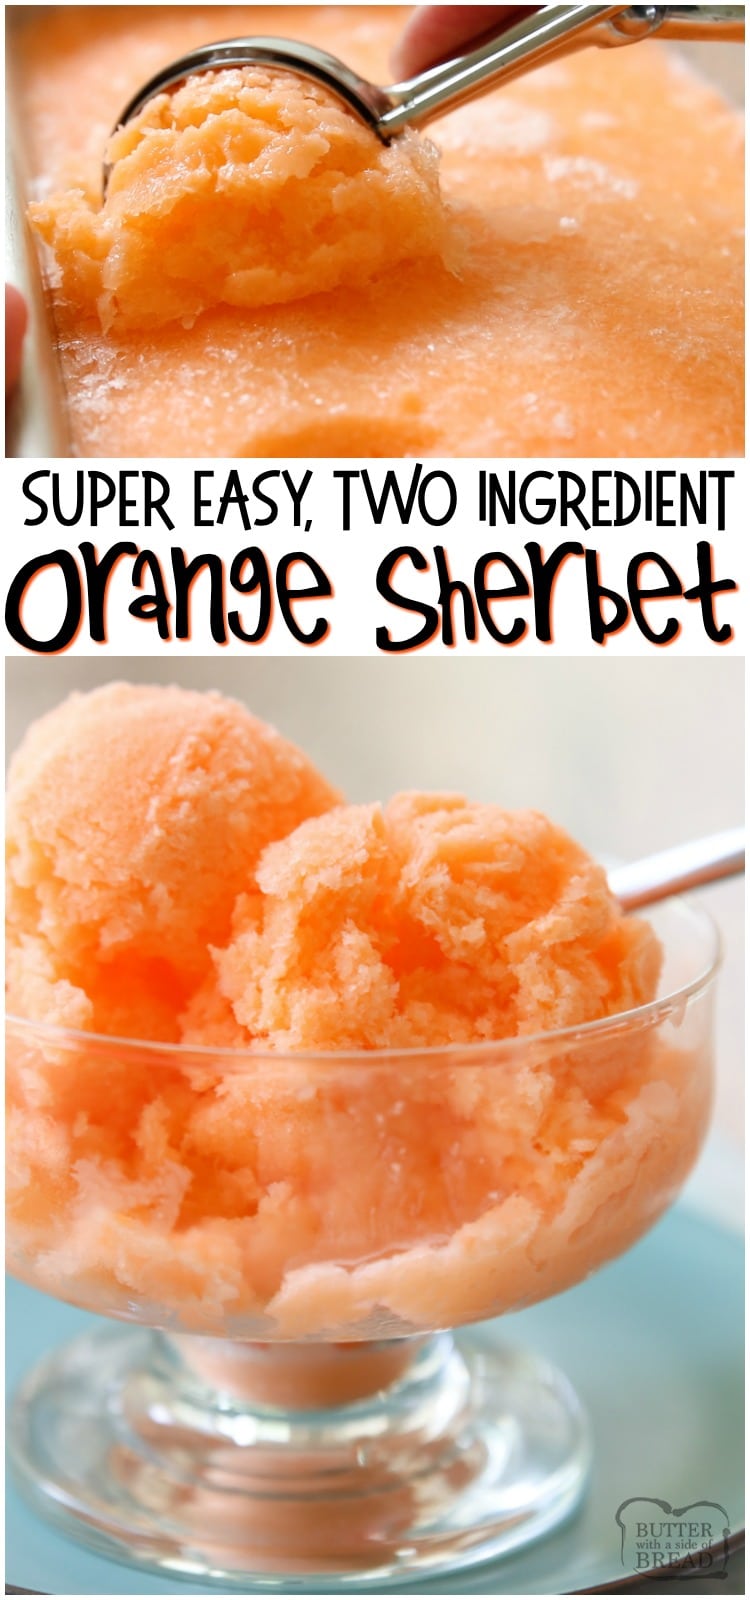 Quick & Easy Orange Sherbet recipe made with just 2 ingredients! Sweet Orange Sherbet perfect for a hot summer day.